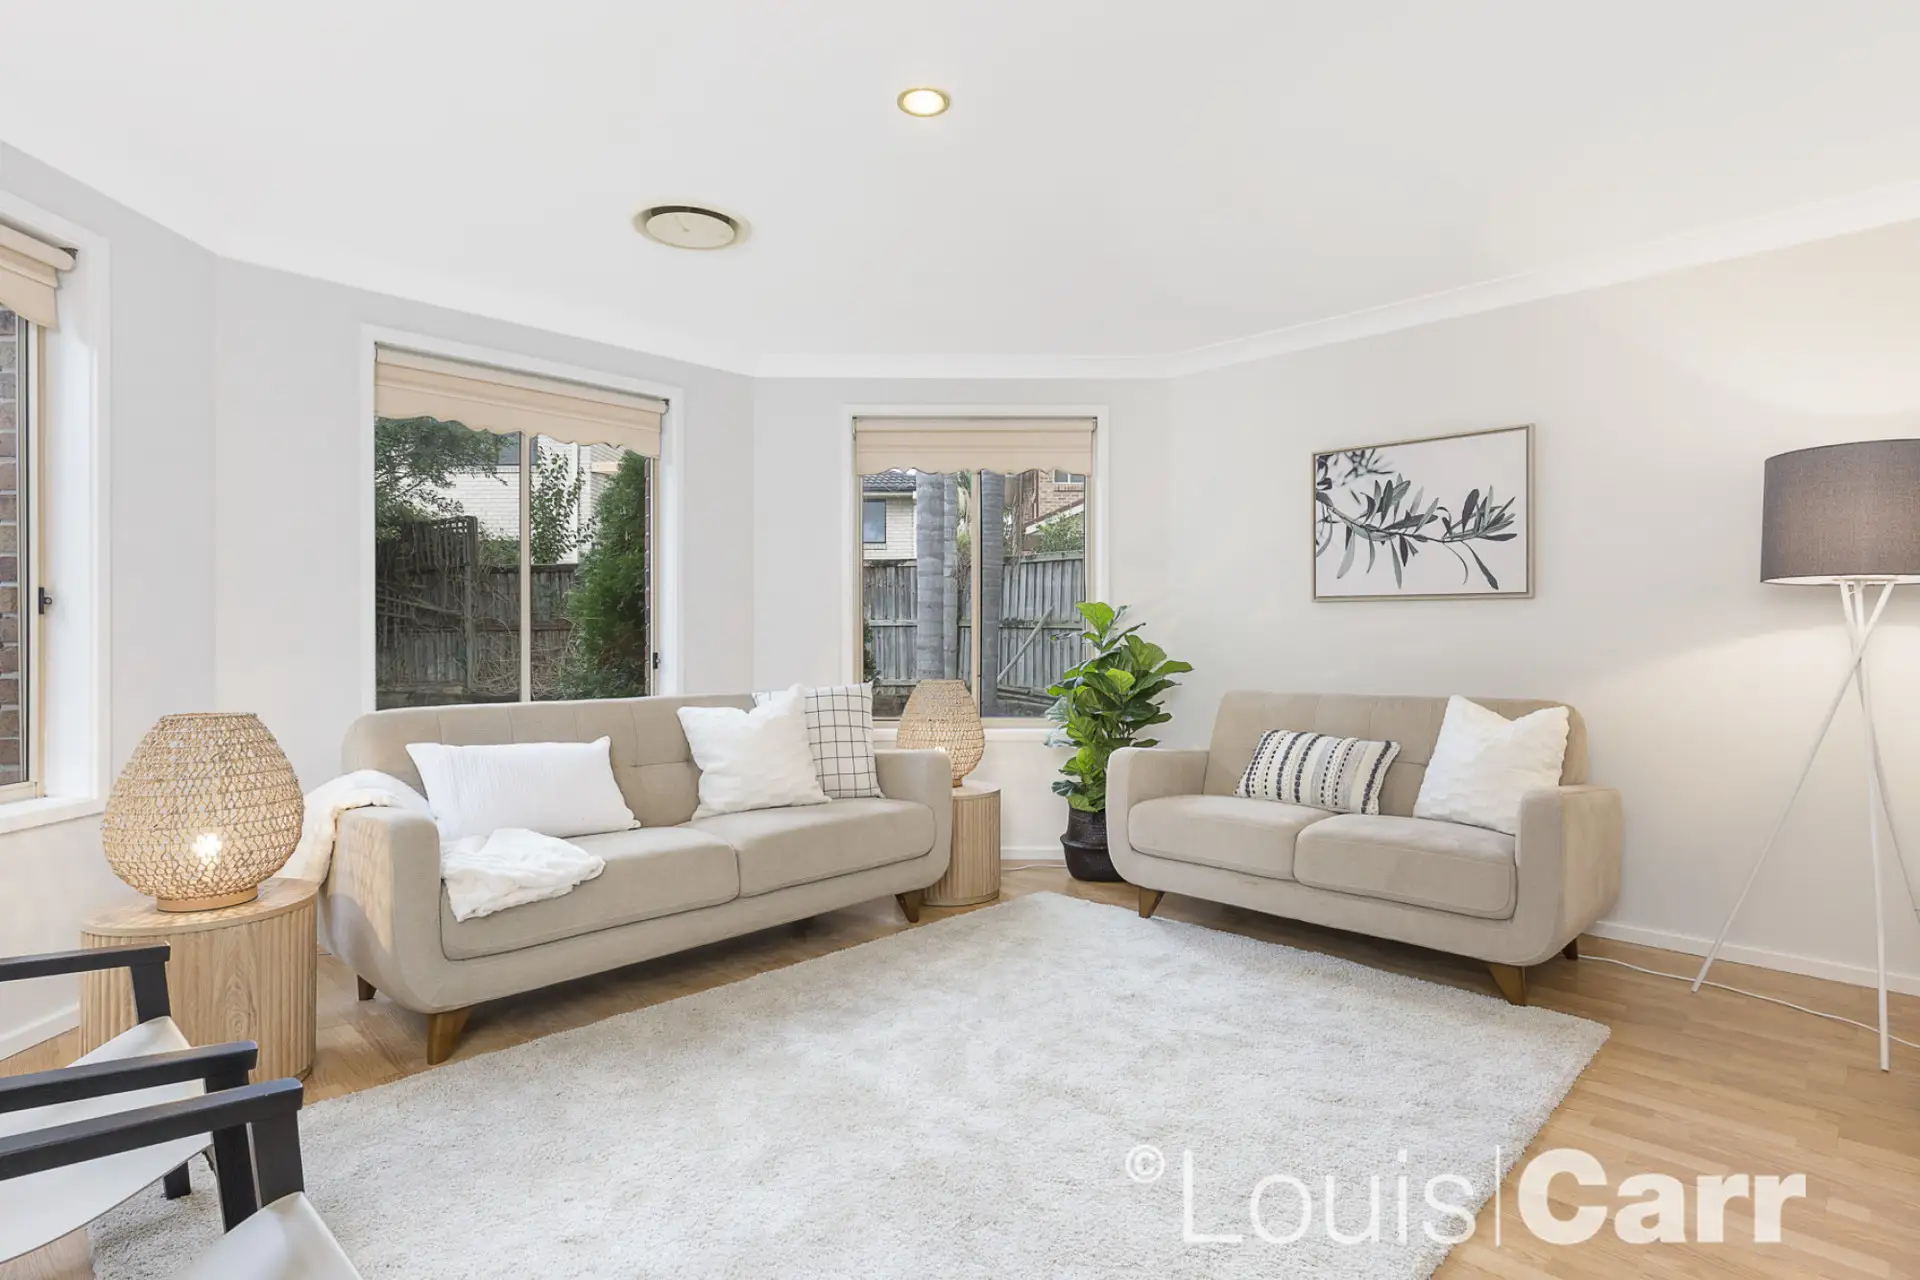 Photo #5: 3 Sandlewood Close, Rouse Hill - Sold by Louis Carr Real Estate